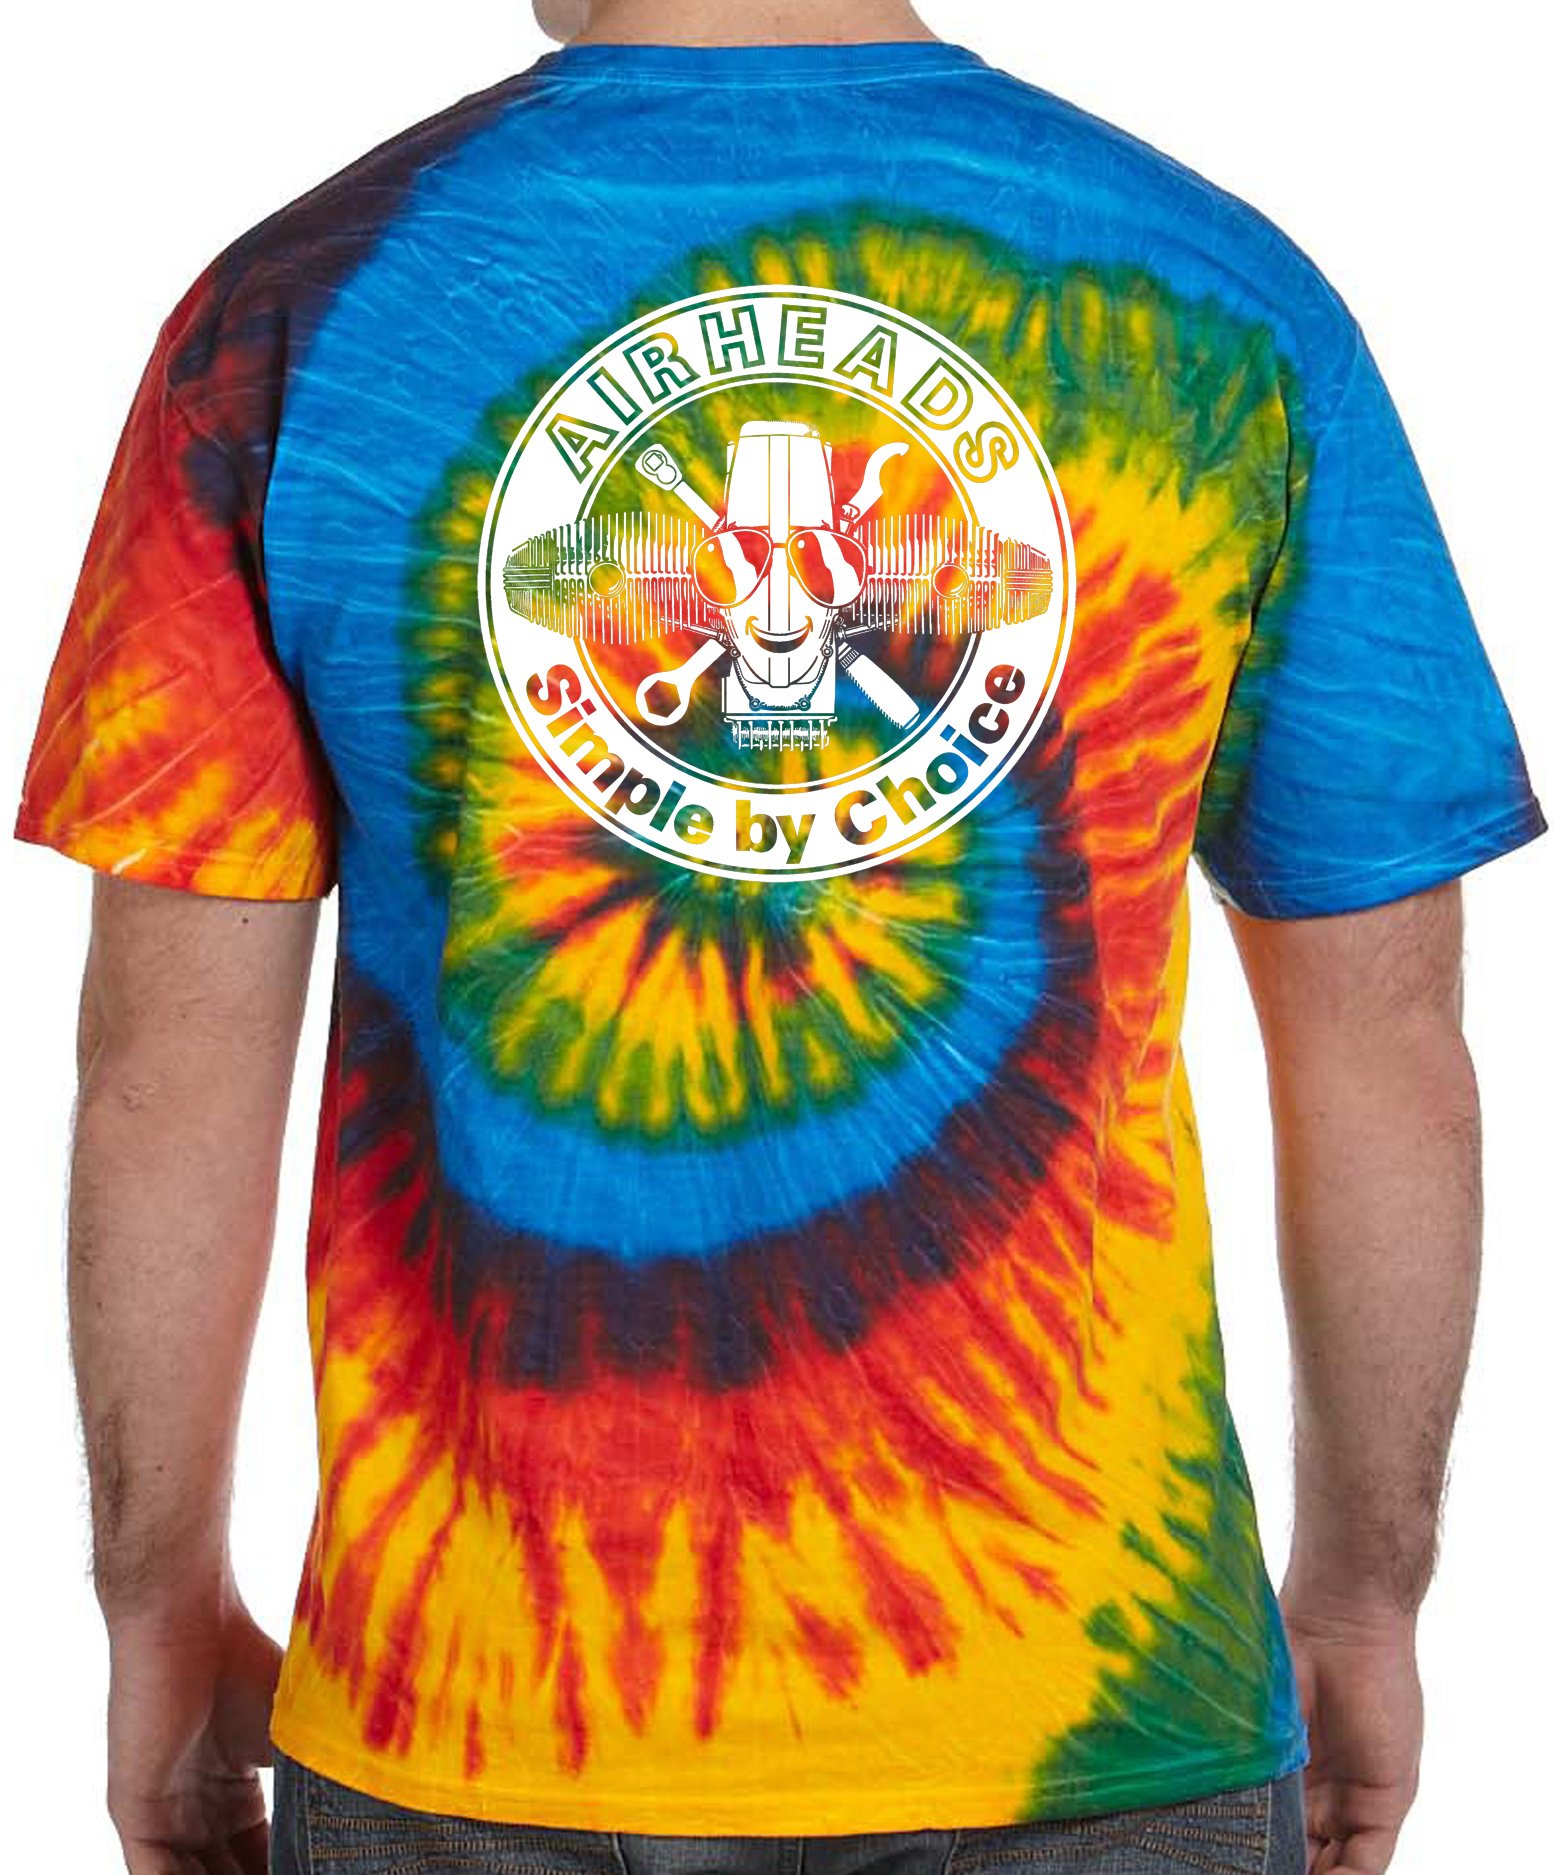 ABC Tie-Dyed T-Shirt – Airheads Beemer Club